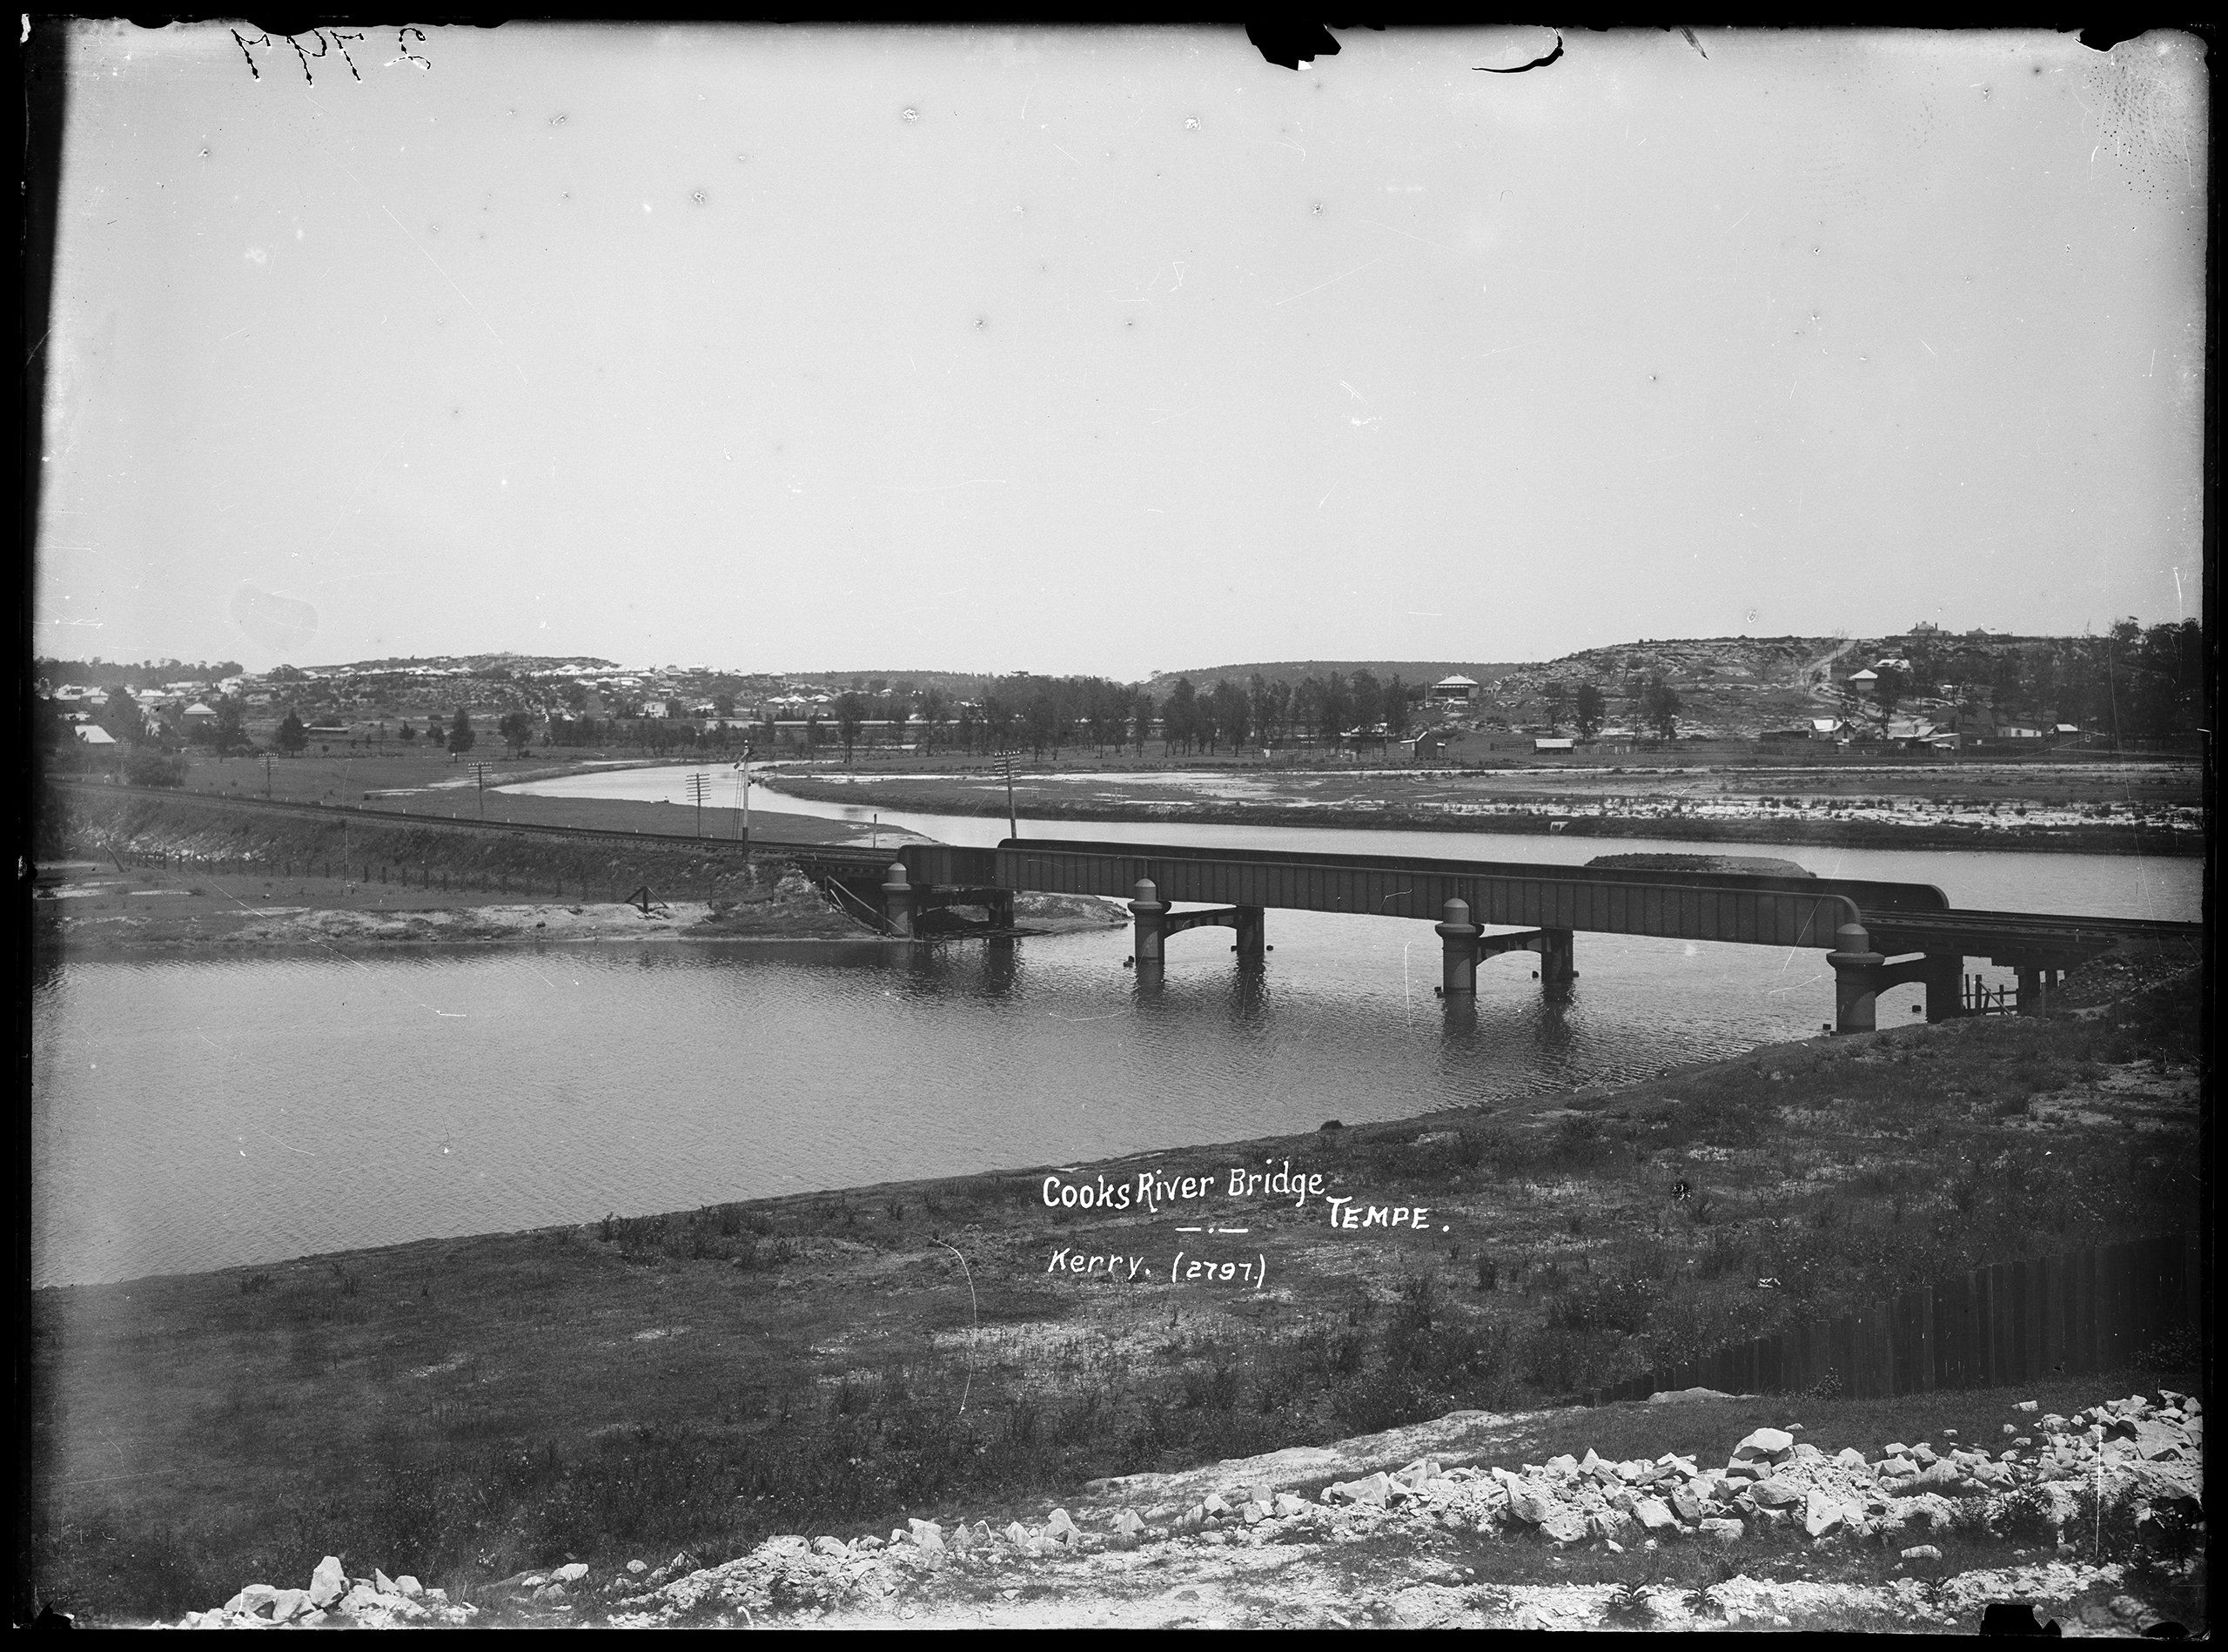 'Cooks River Bridge, Tempe' glass negative by Kerry and Co